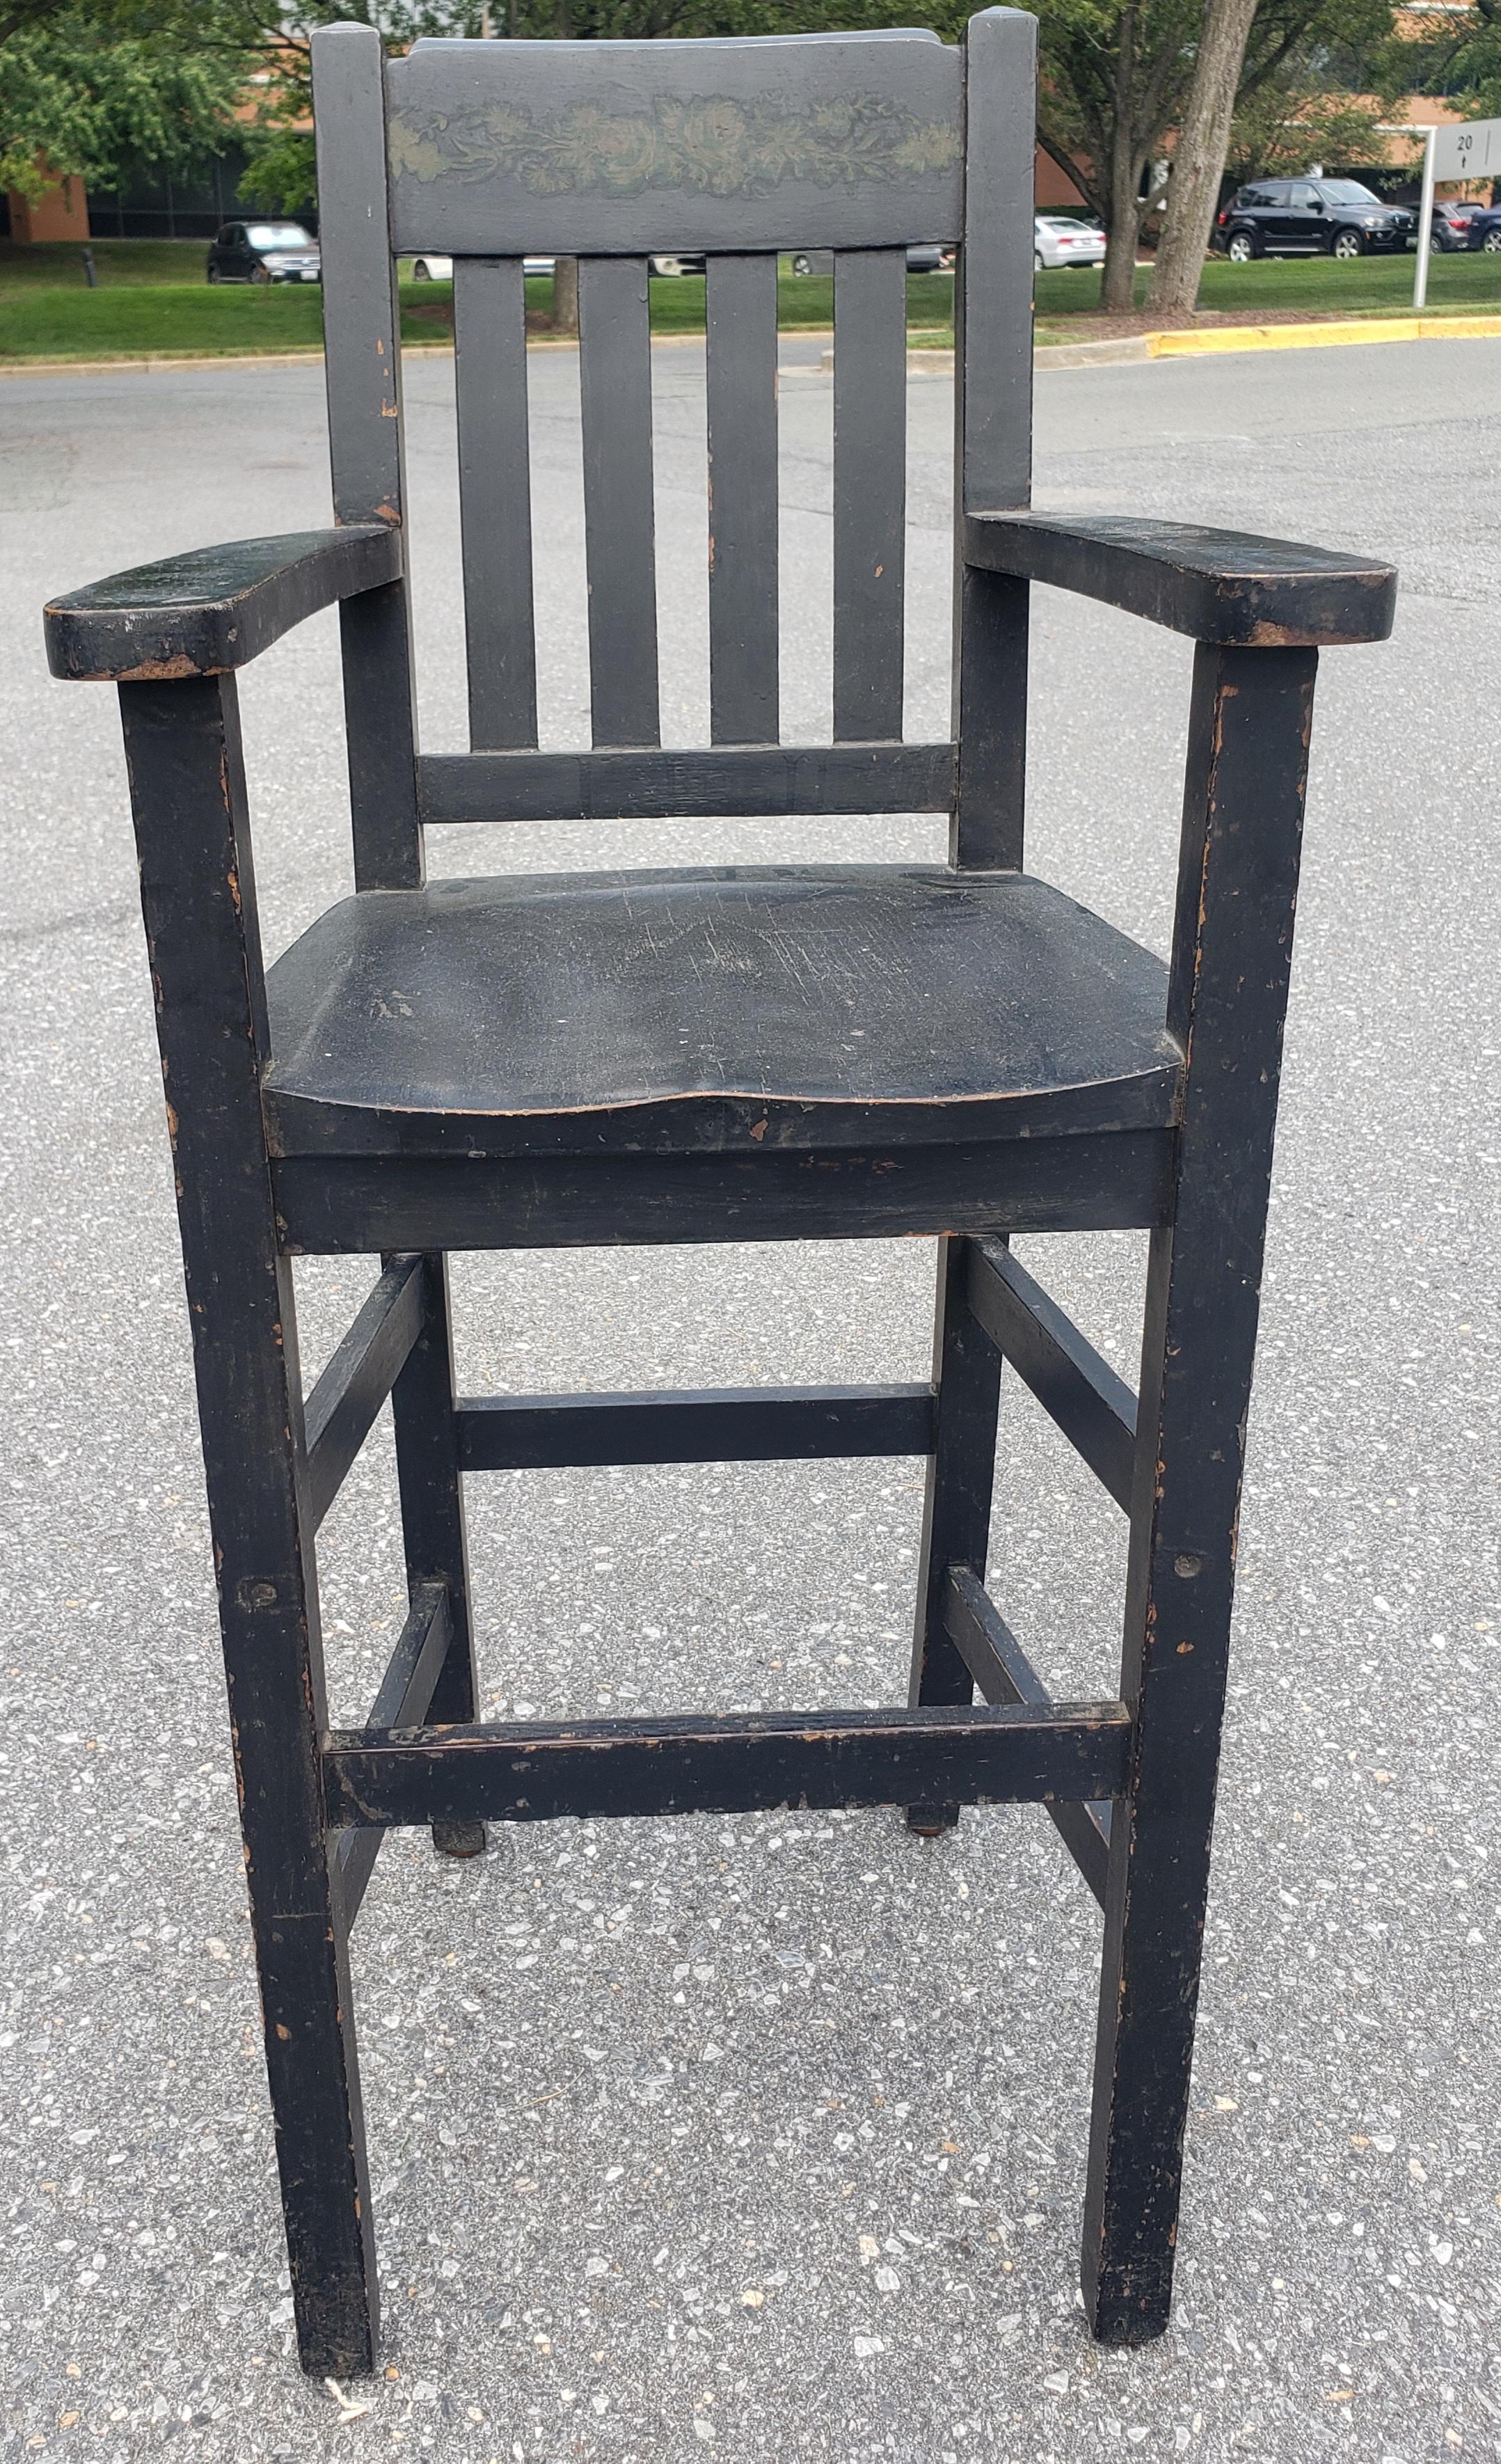 heywood brothers and wakefield company chair